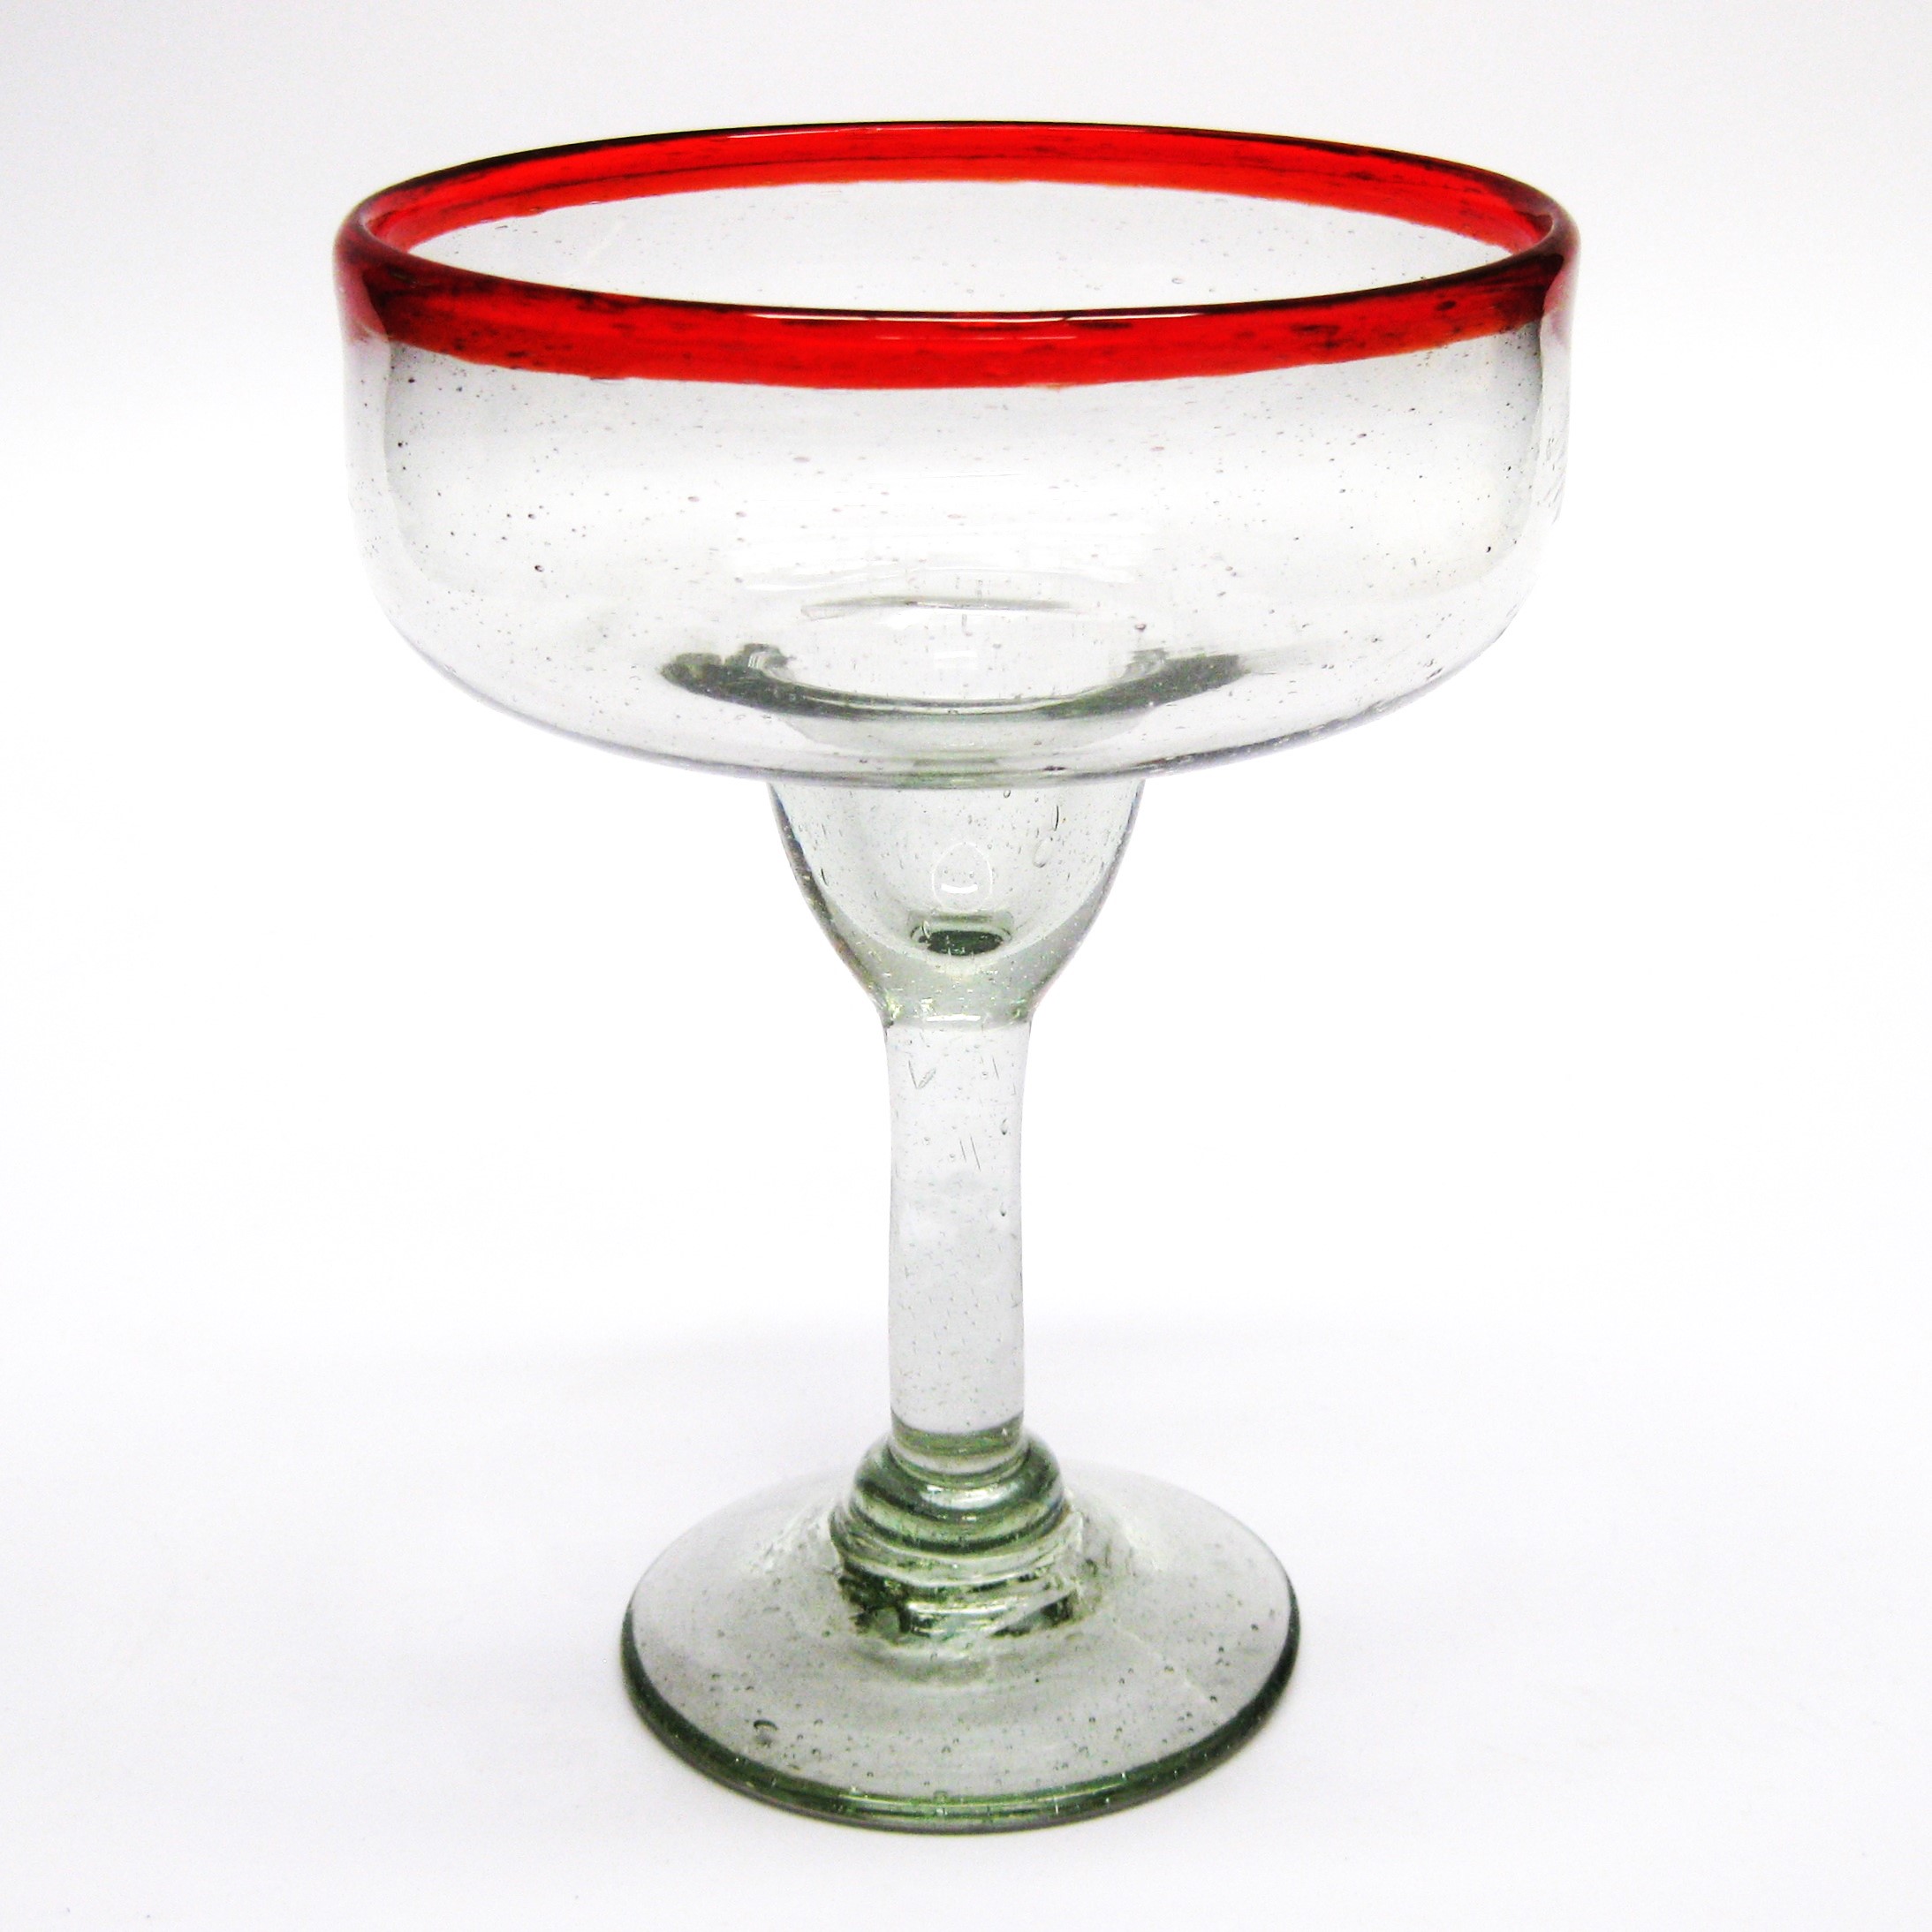 Wholesale Mexican Margarita Glasses / Ruby Red Rim 14 oz Large Margarita Glasses  / For the margarita lover, these enjoyable large sized margarita glasses feature a cheerful ruby red rim.